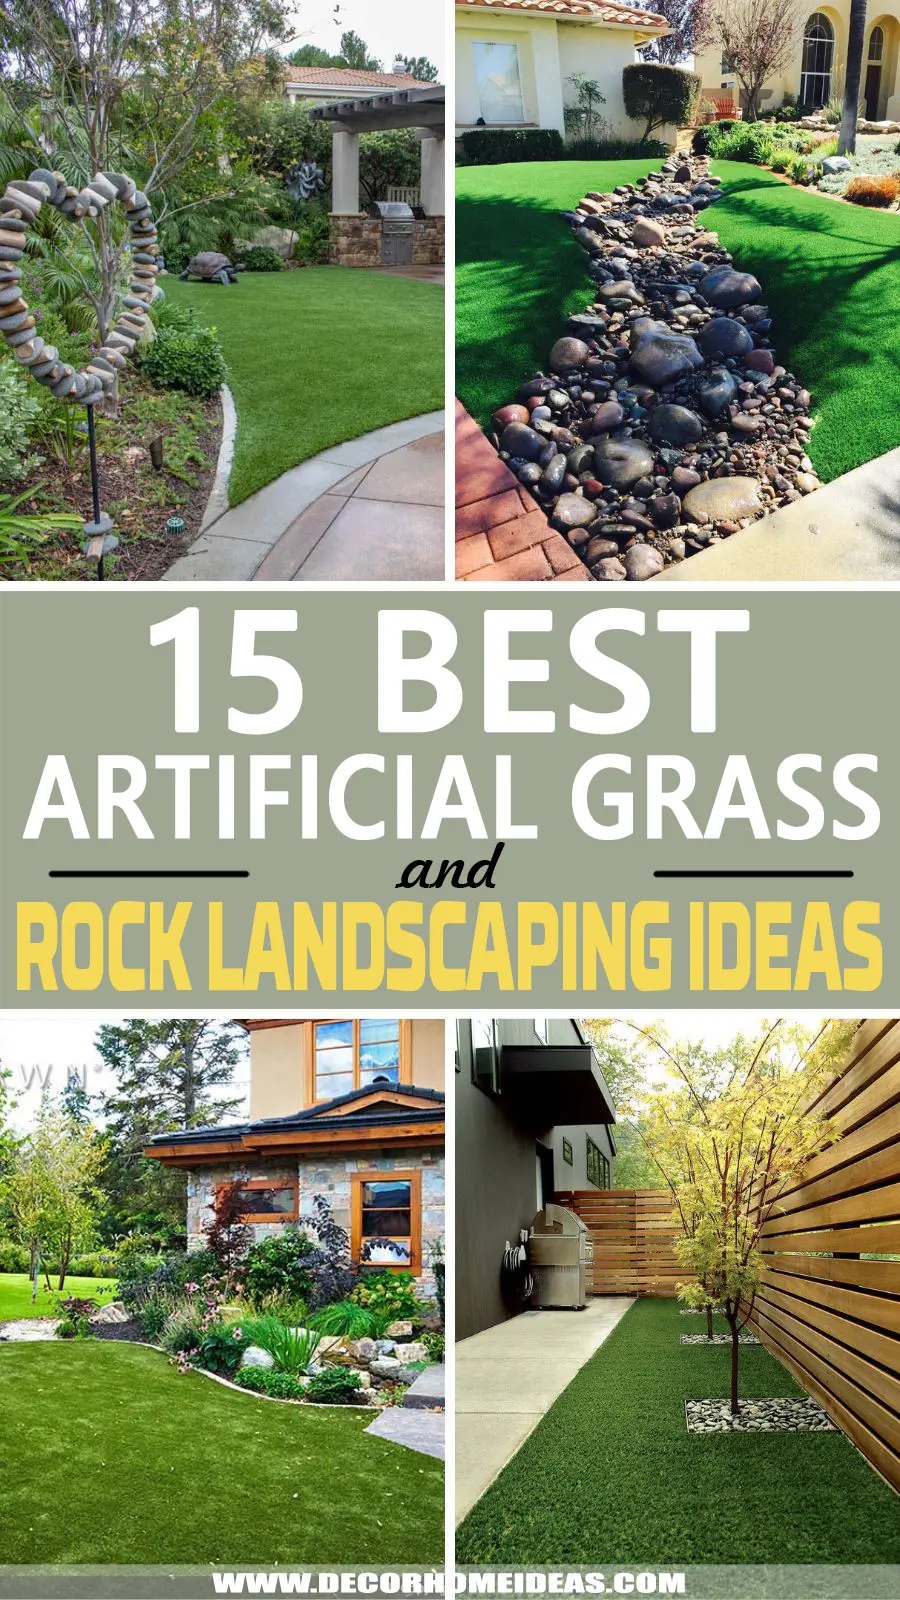 Best Artificial Grass and Rock Landscaping Ideas. These are the best ideas to combine artificial grass and rocks in your garden to create an amazing landscape. 